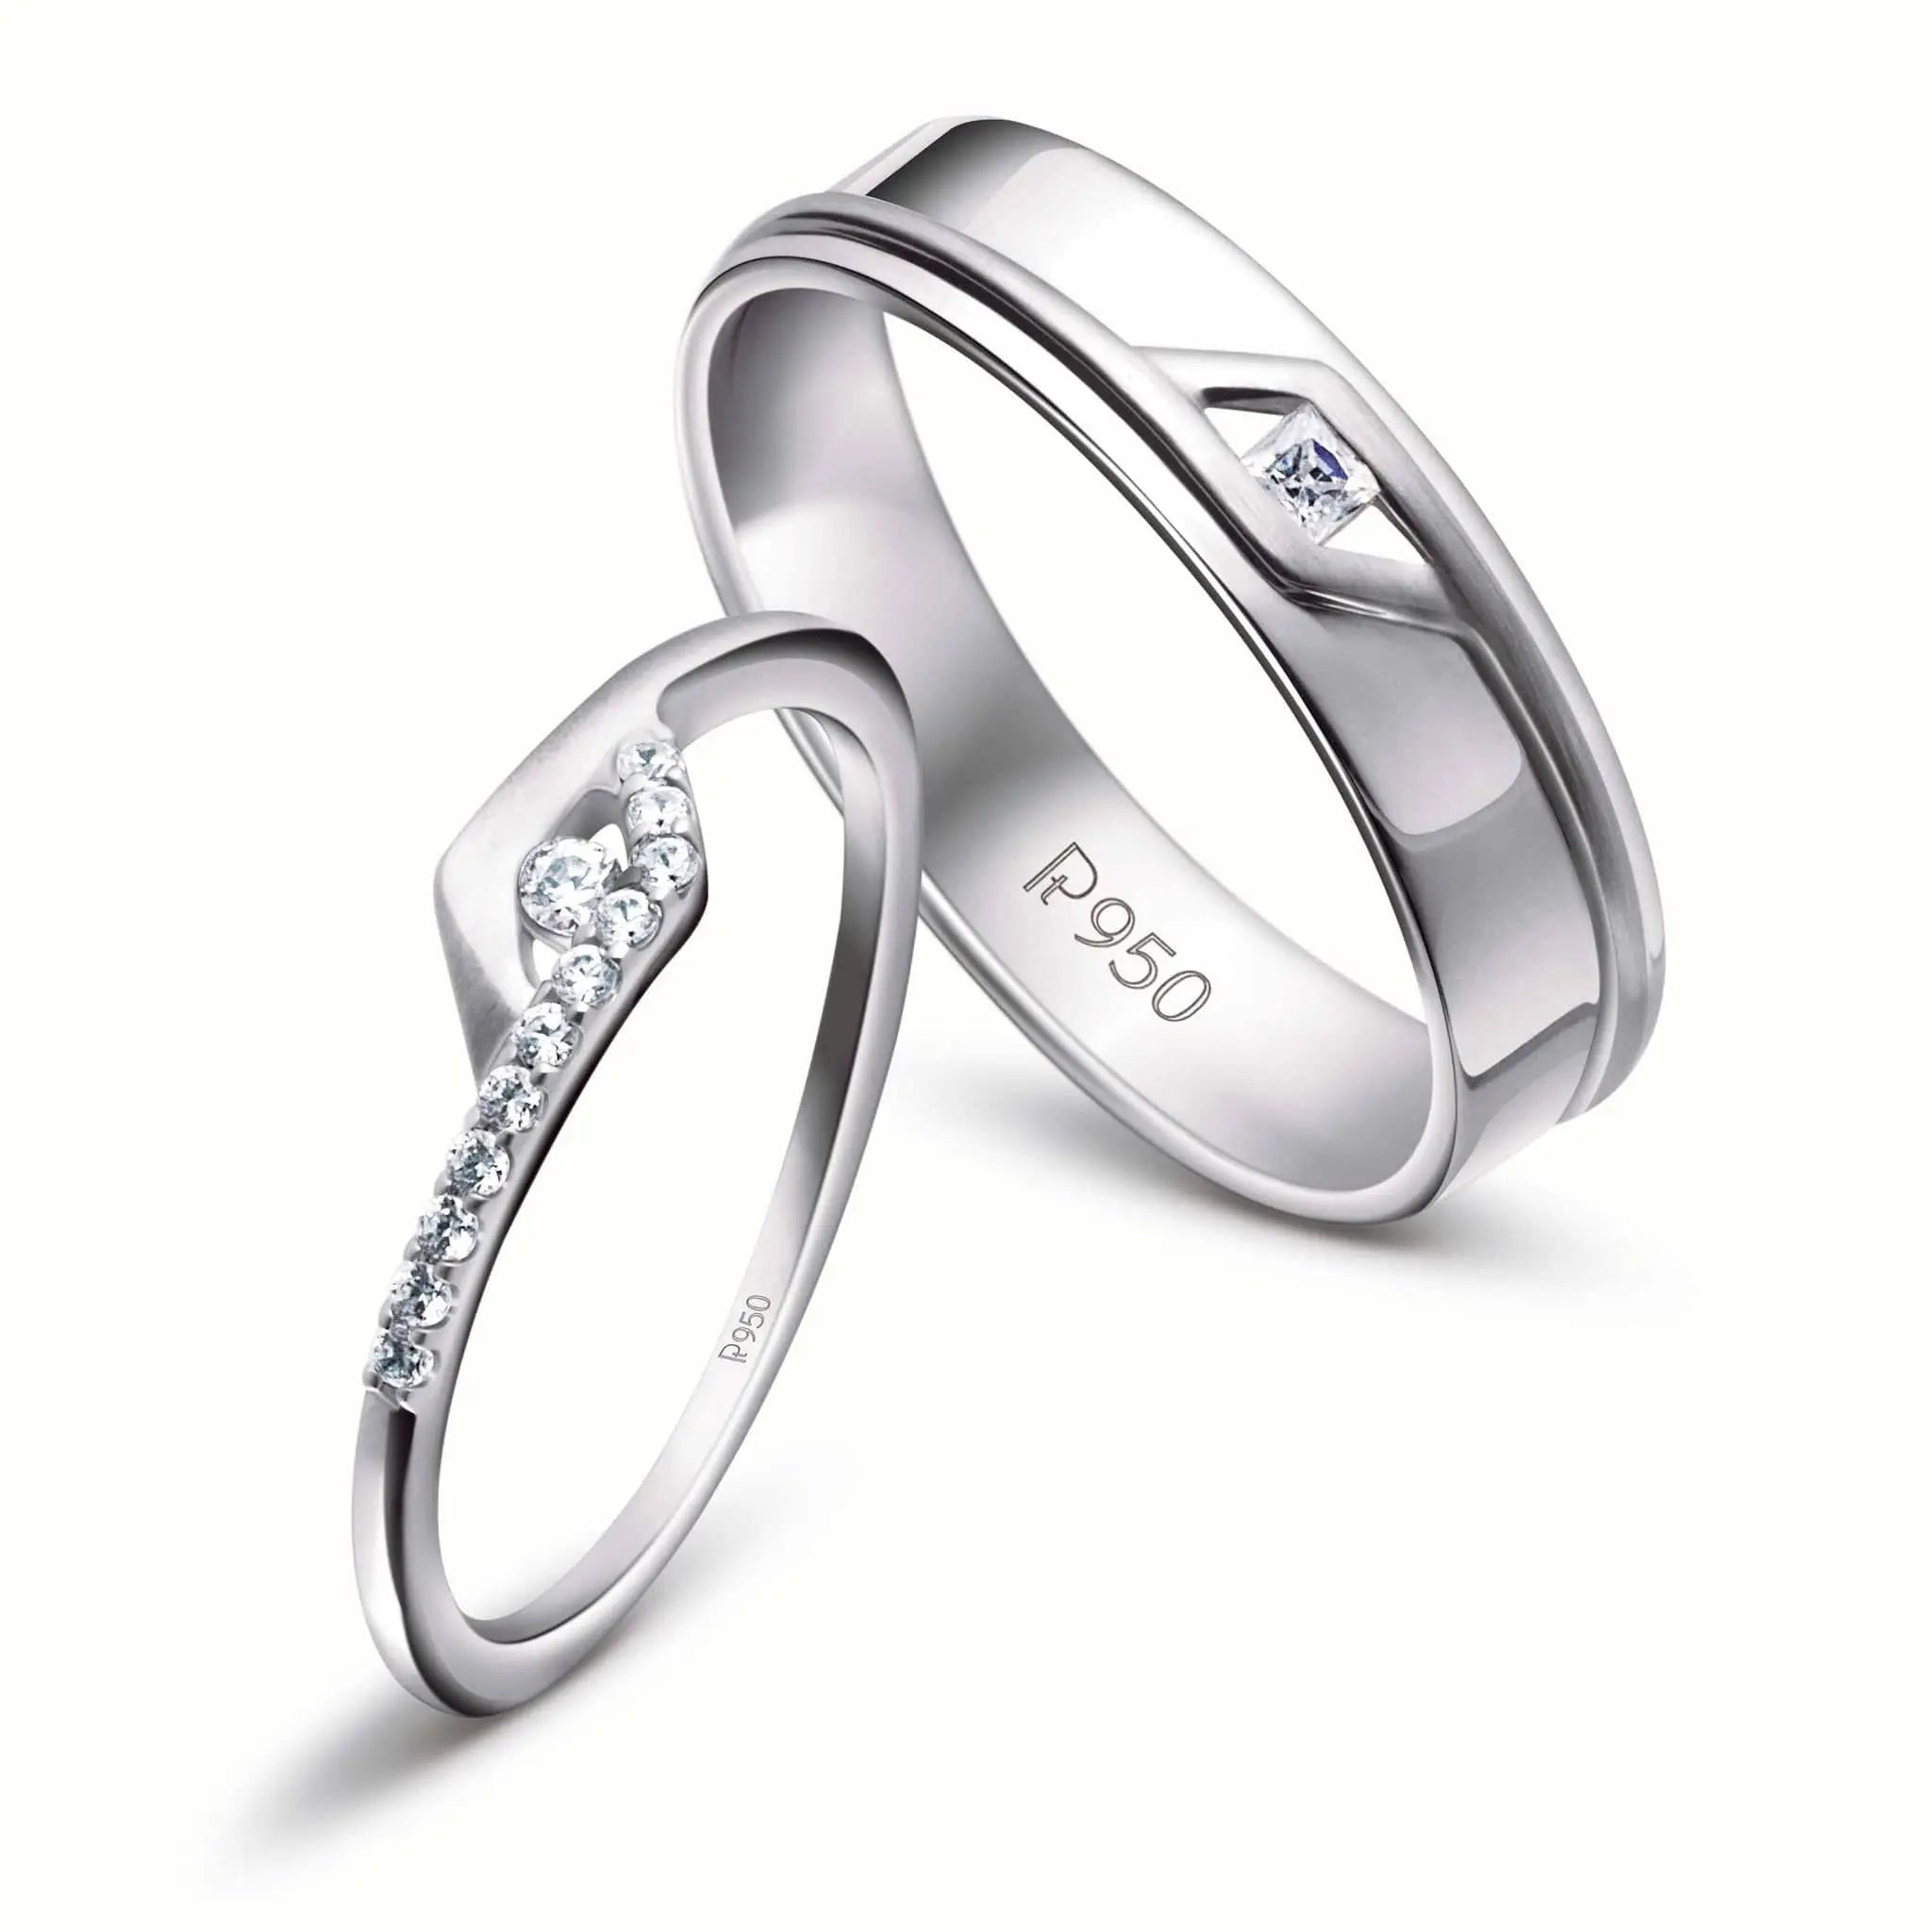 Best Women's Wedding Rings for a Second Marriage | With Clarity